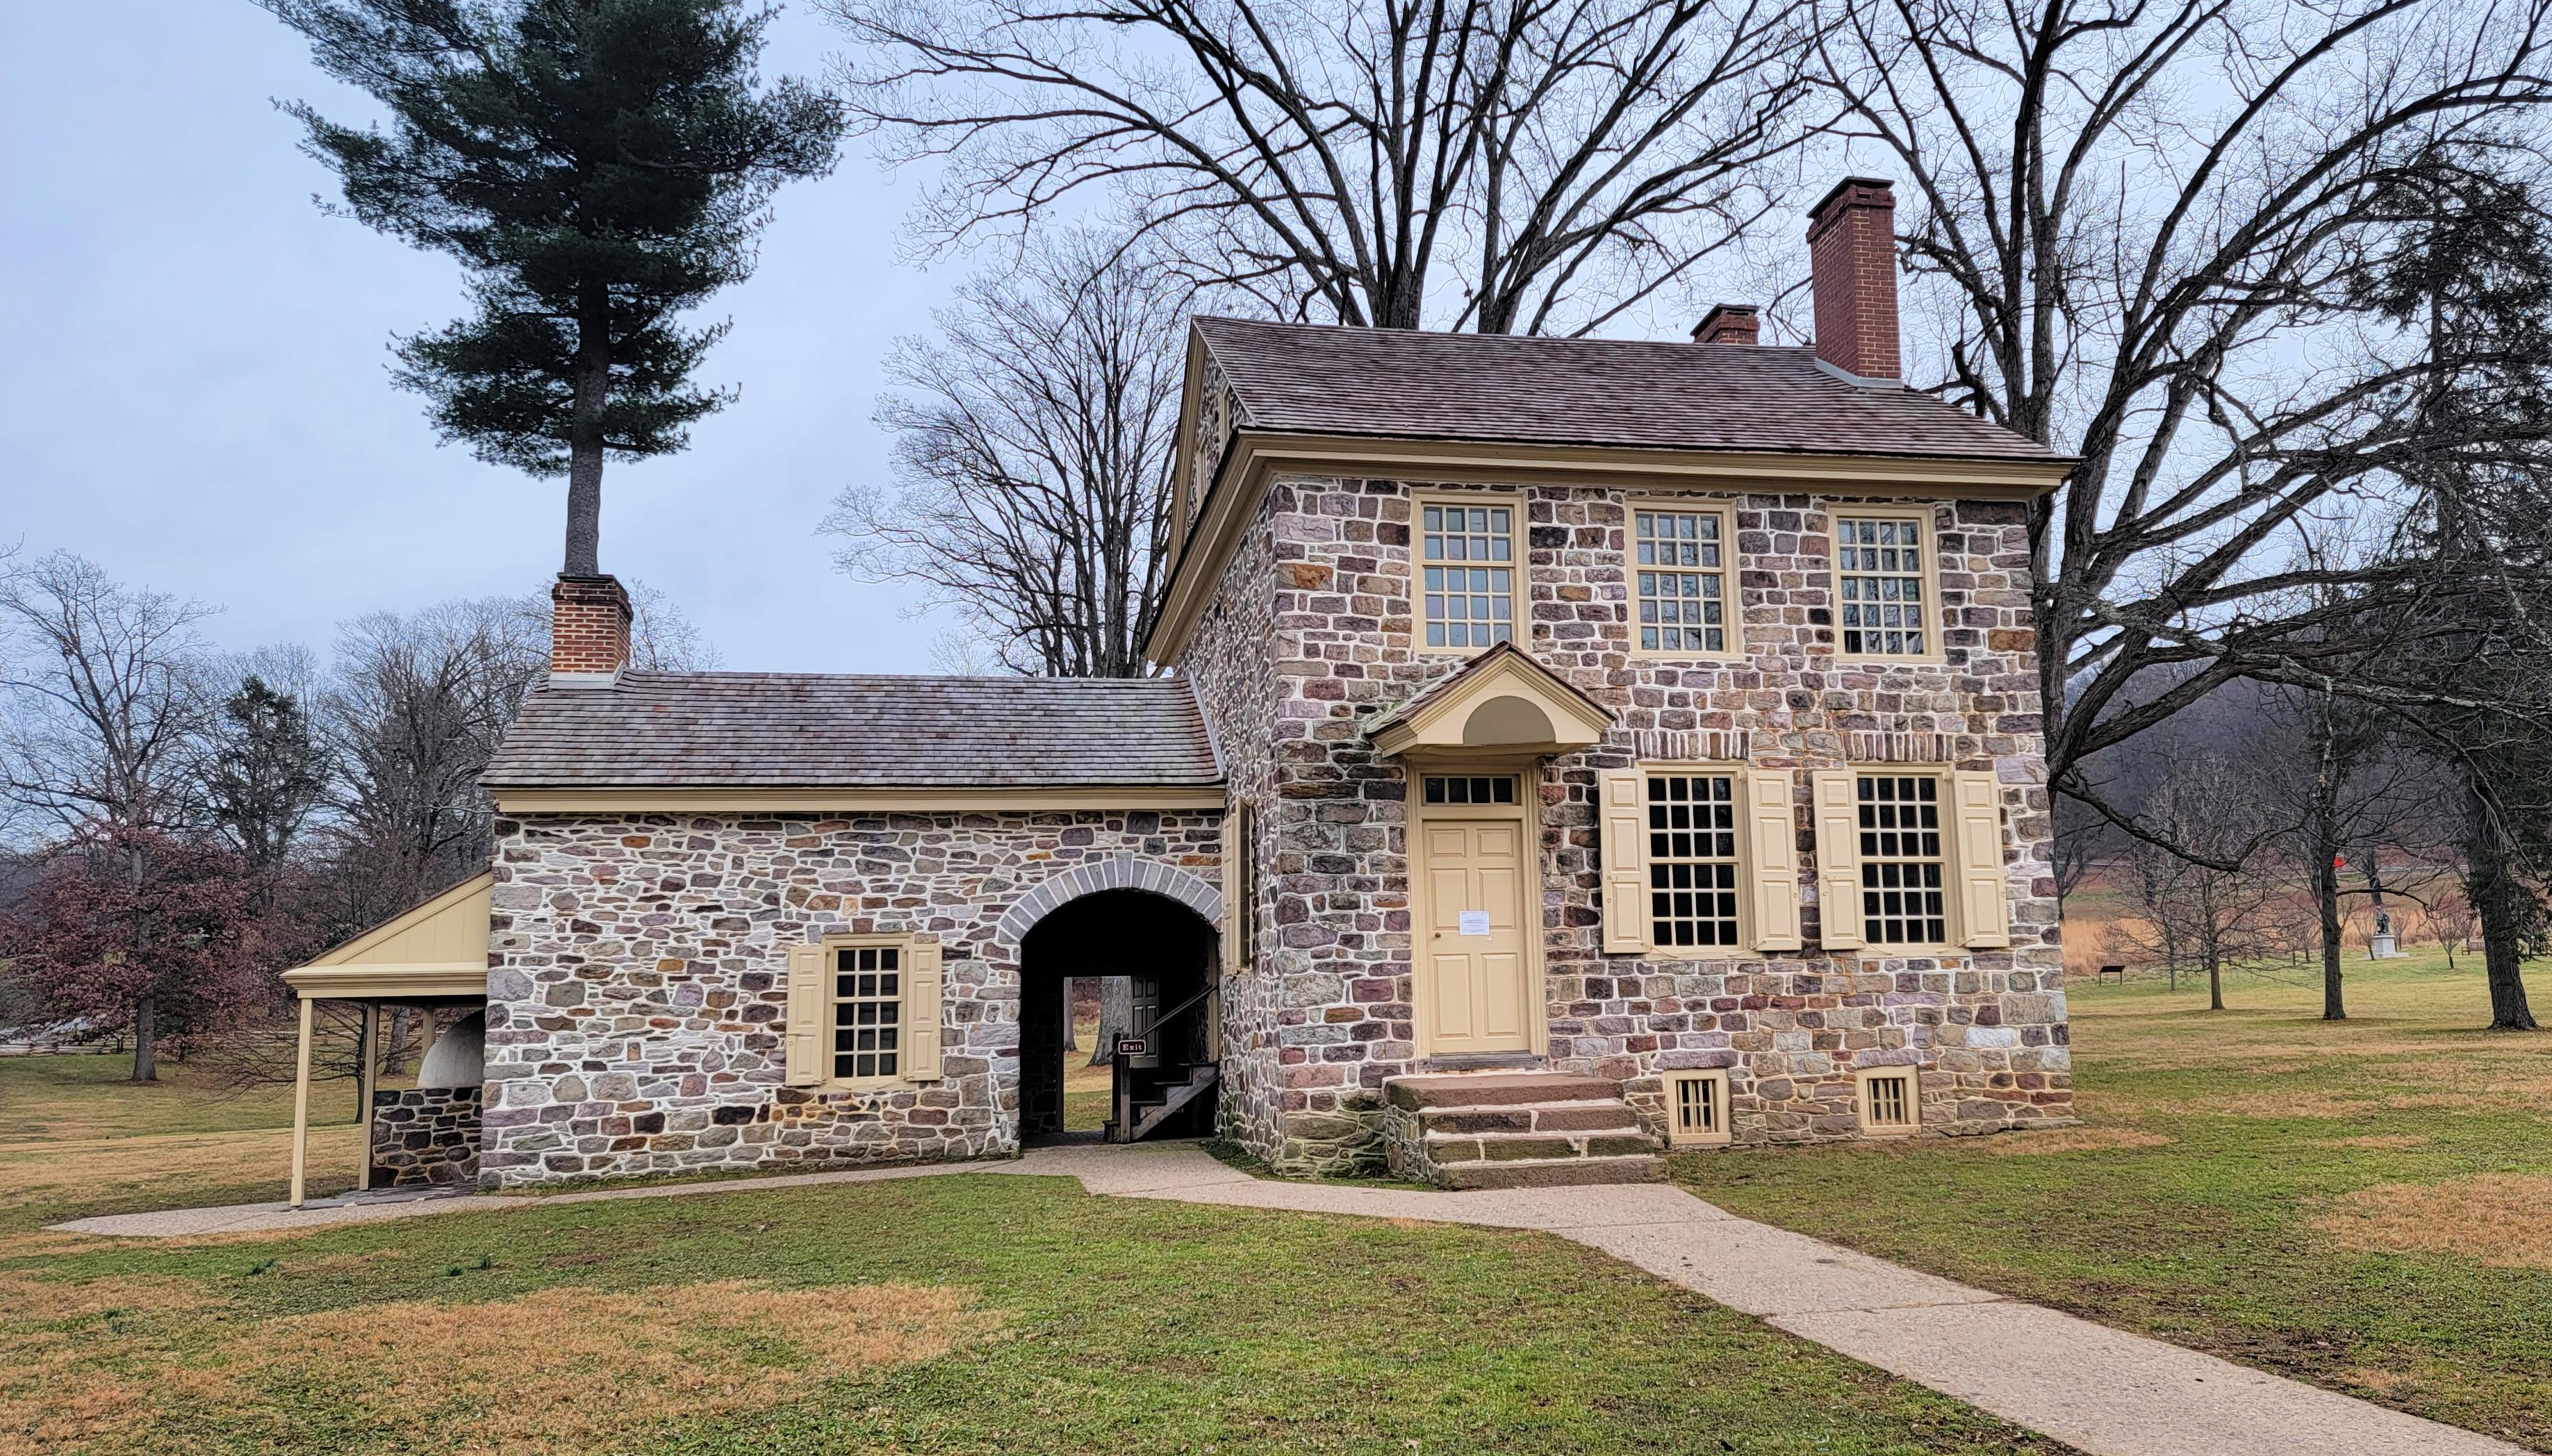 General Washington's headquarters at Valley Forge. 